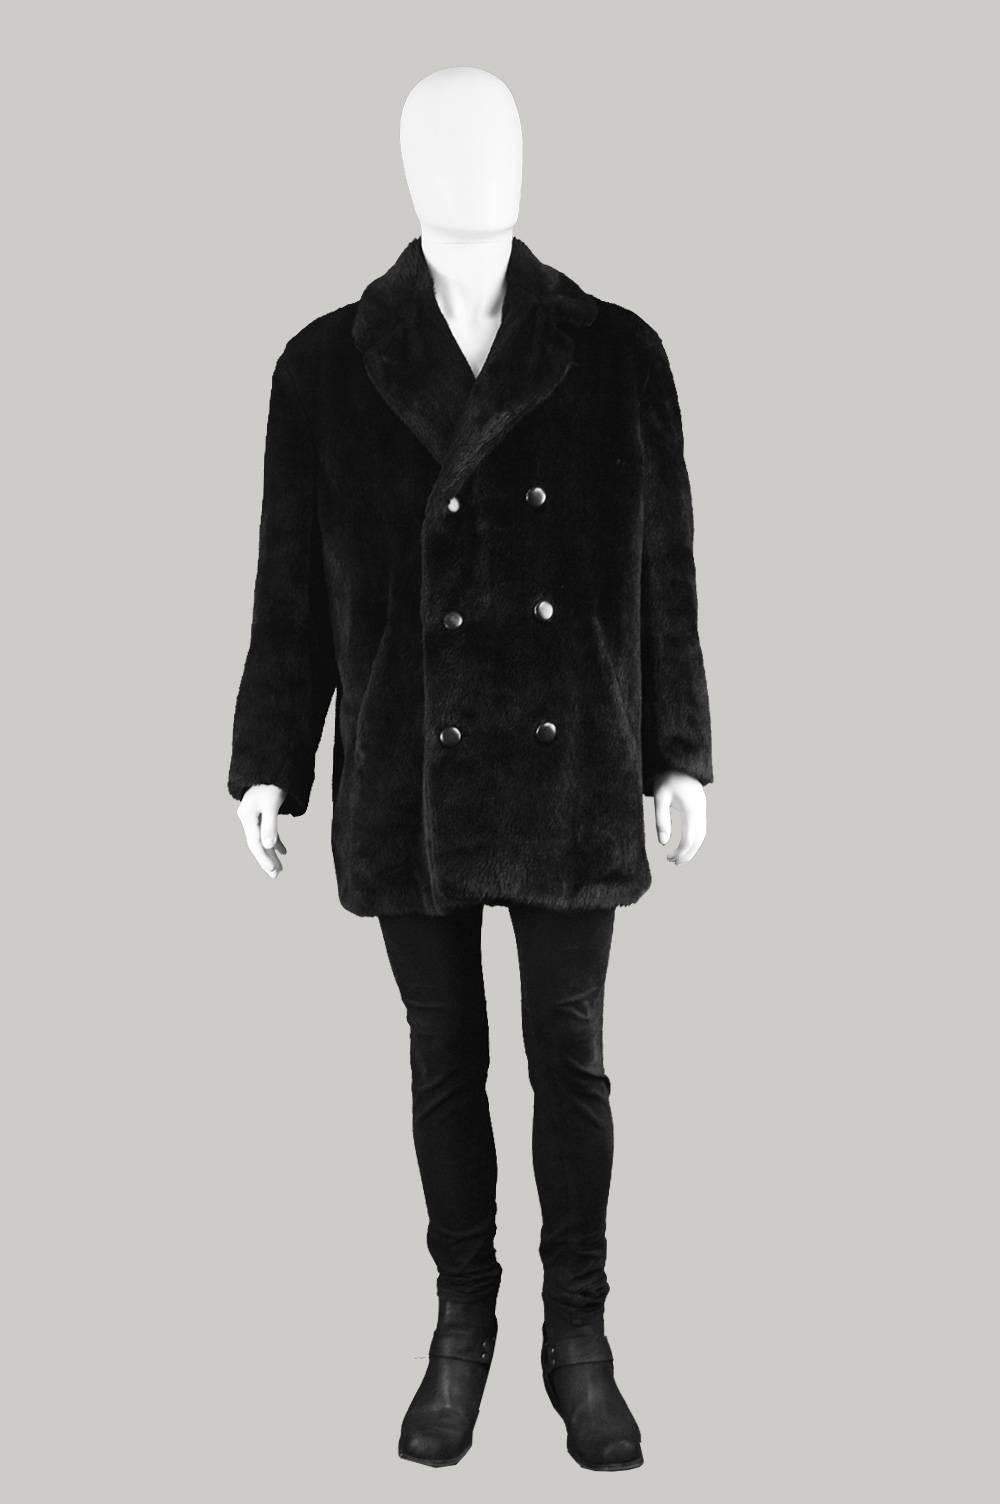 An incredible and rare vintage mens faux fur coat from the 70s by legendary British designer, Hardy Amies for his ready to wear line for menswear label, Hepsworths. In a classic black faux fur, with double breasted buttons down the front to give an